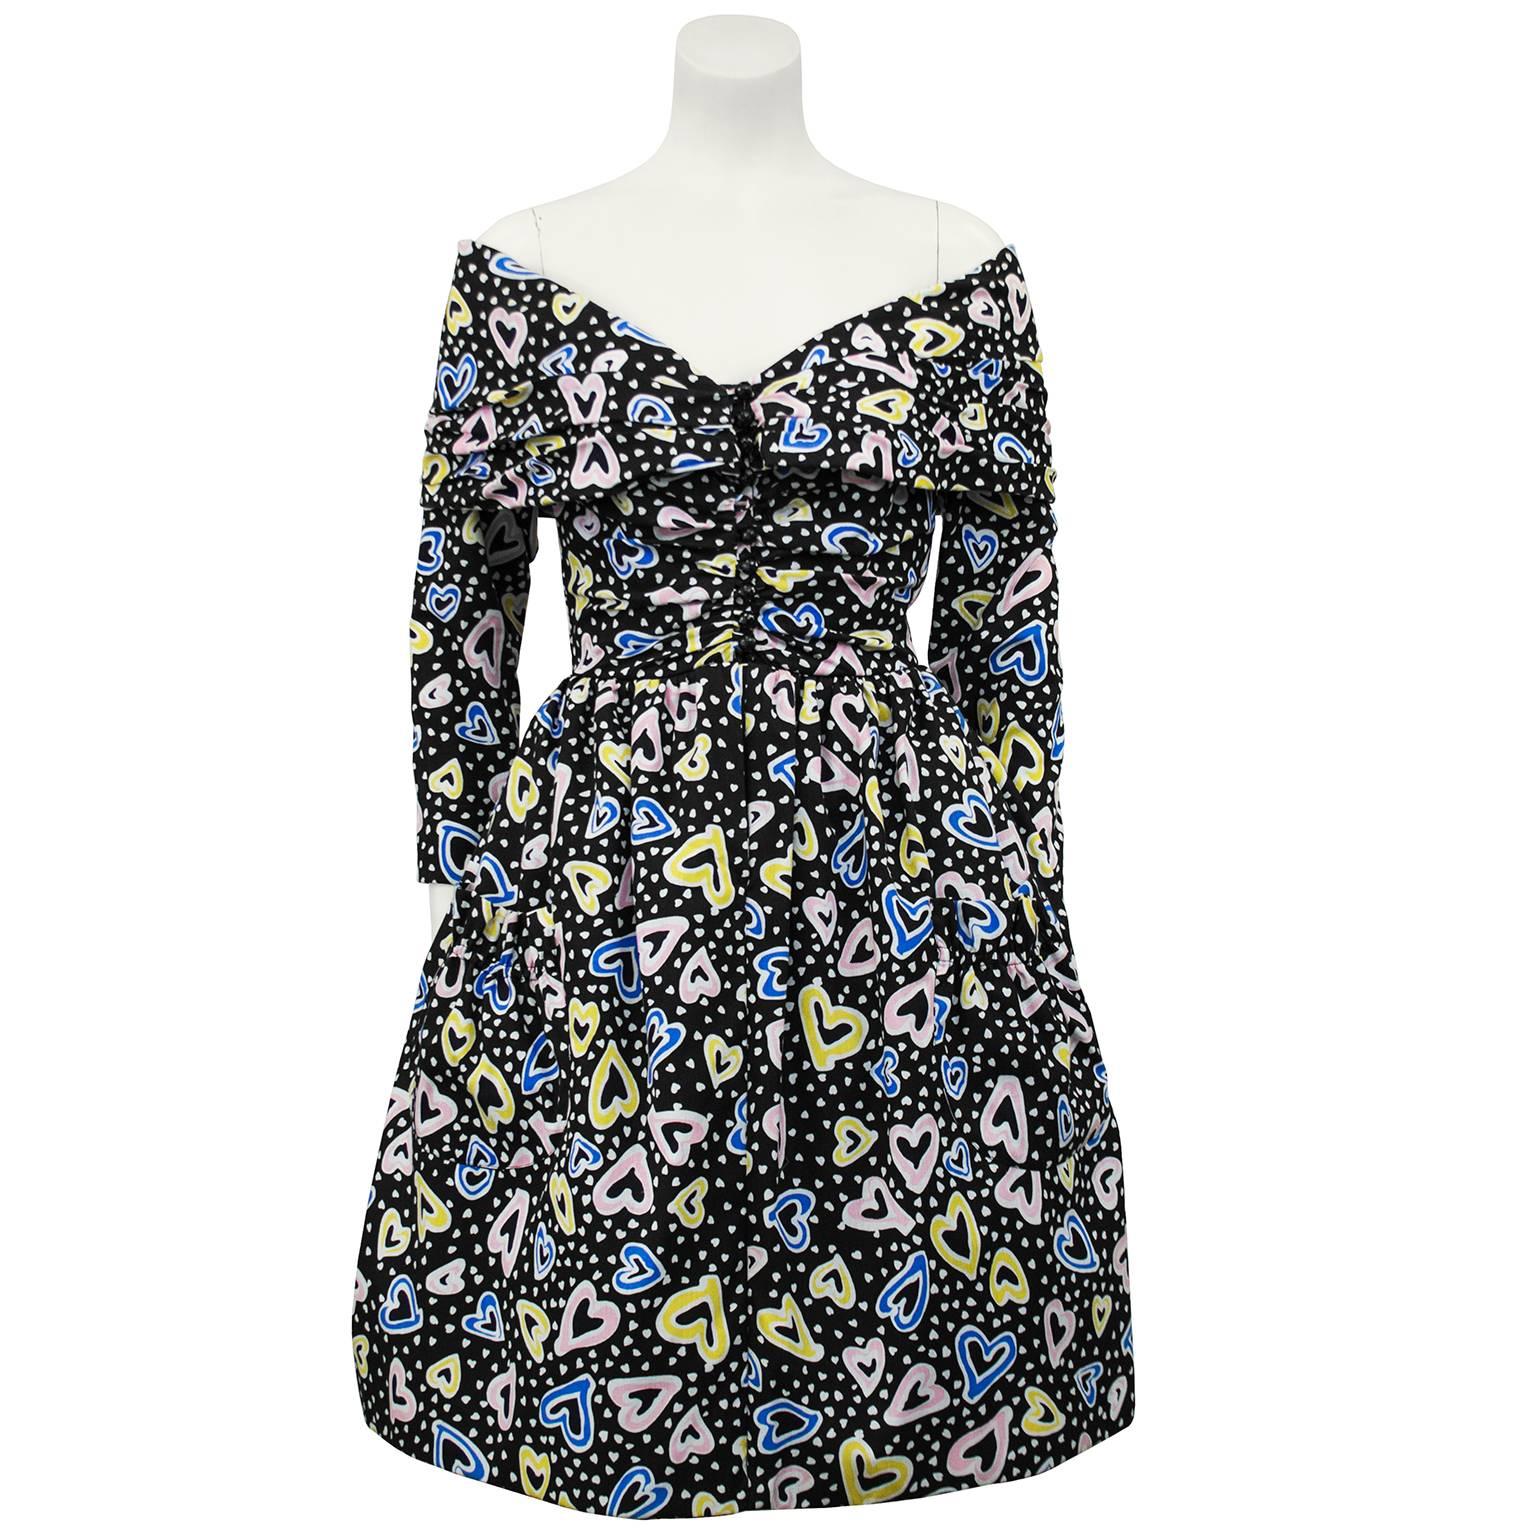 Keith Haring-esque printed 1980s Victor Costa cocktail dress with corset body in the style of Christian Lacroix. The dress has a hidden zipper up the front of the sweetheart neckline corset and the full length sleeves and off the shoulder wraps over